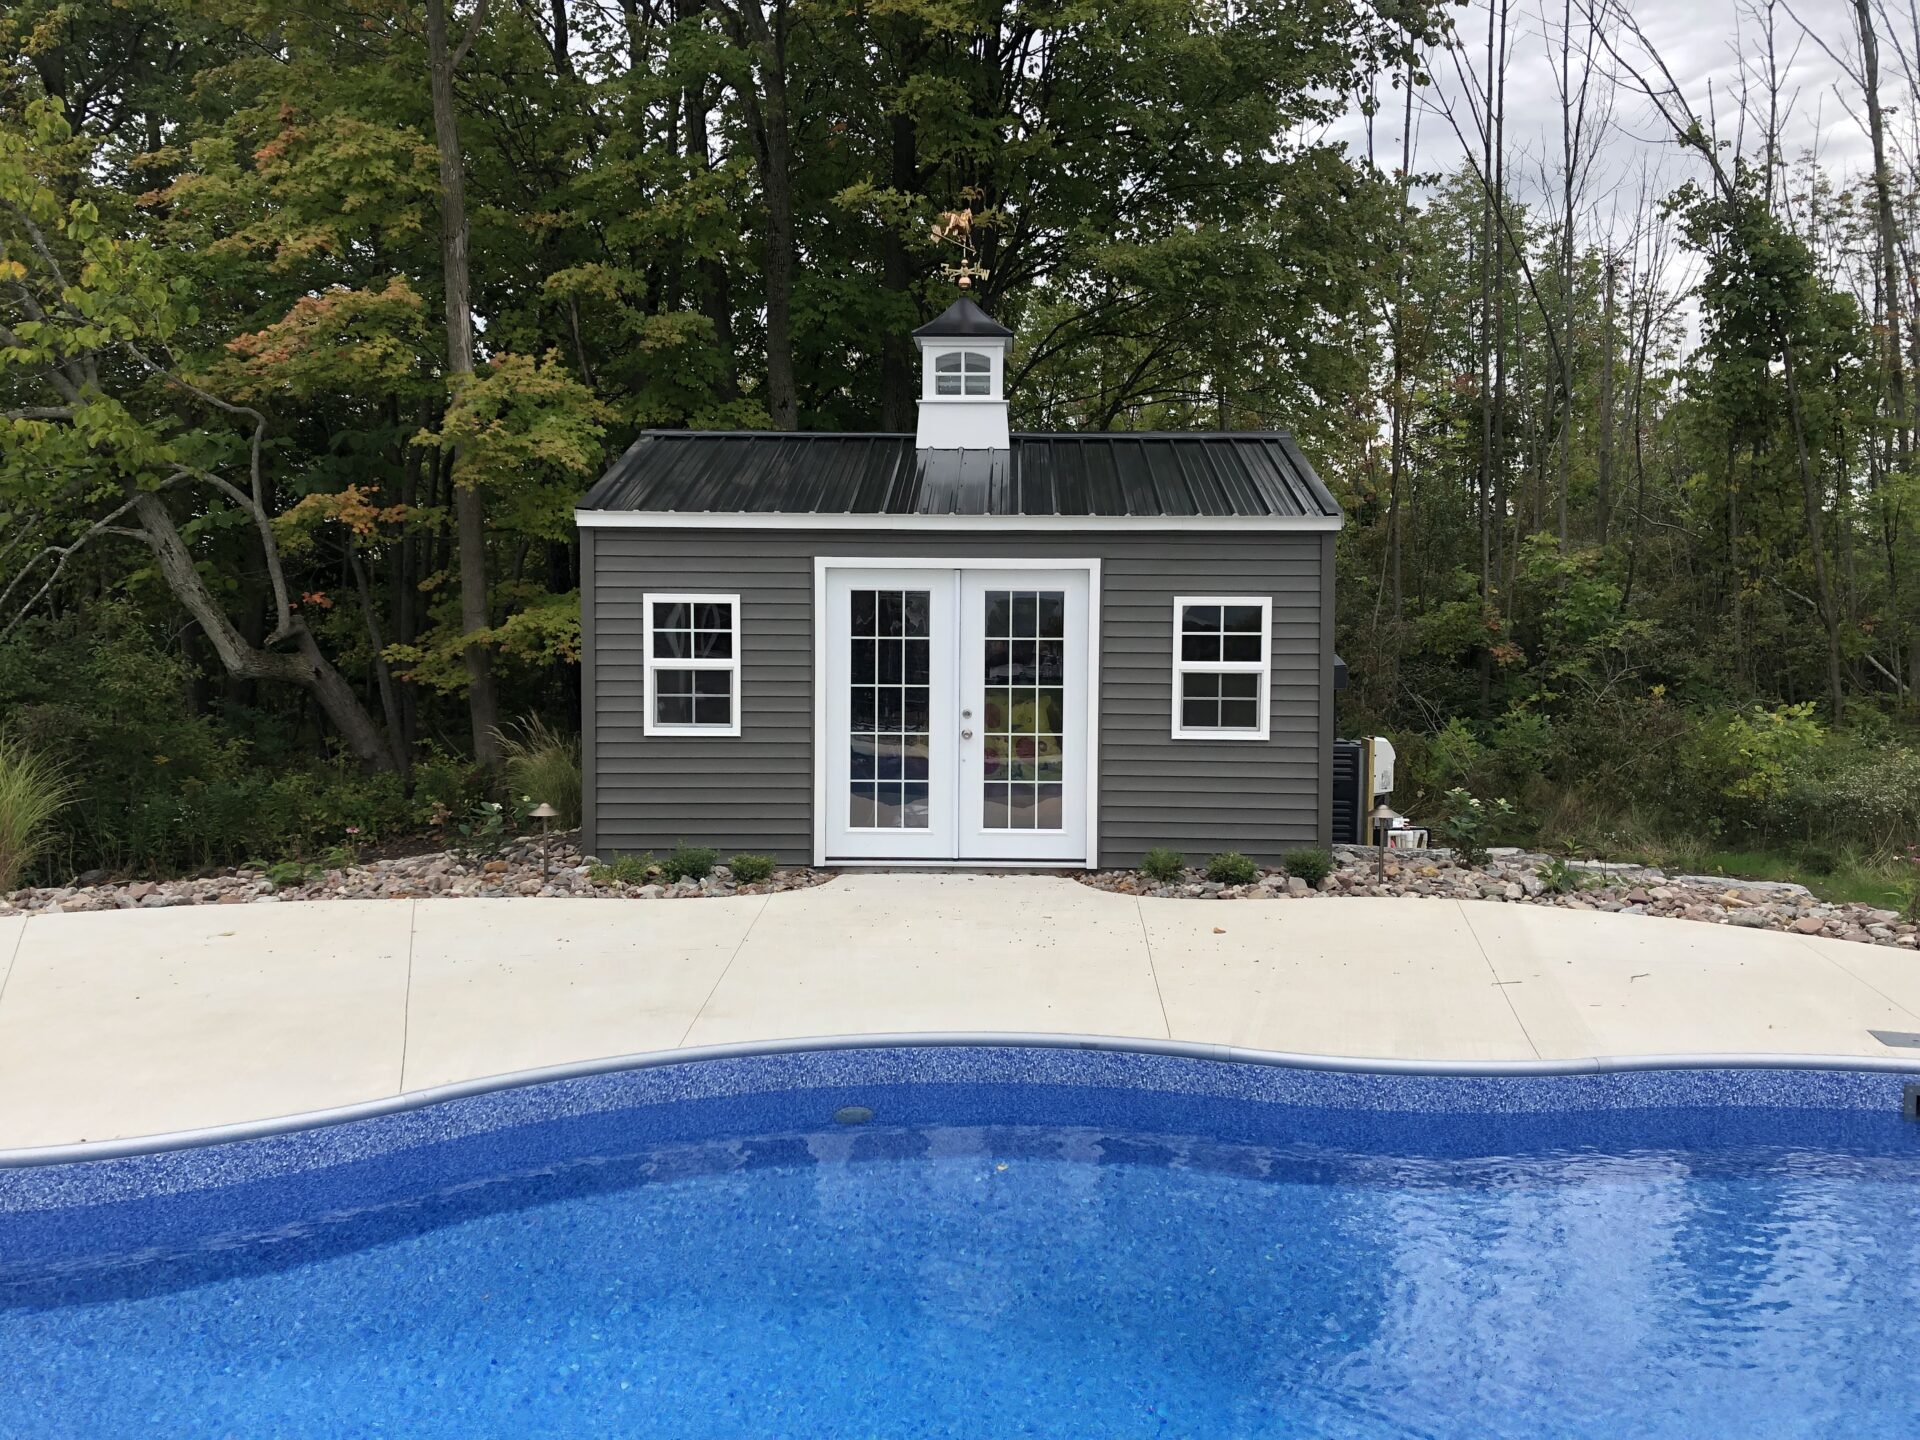 A pool house with a shed and a door.